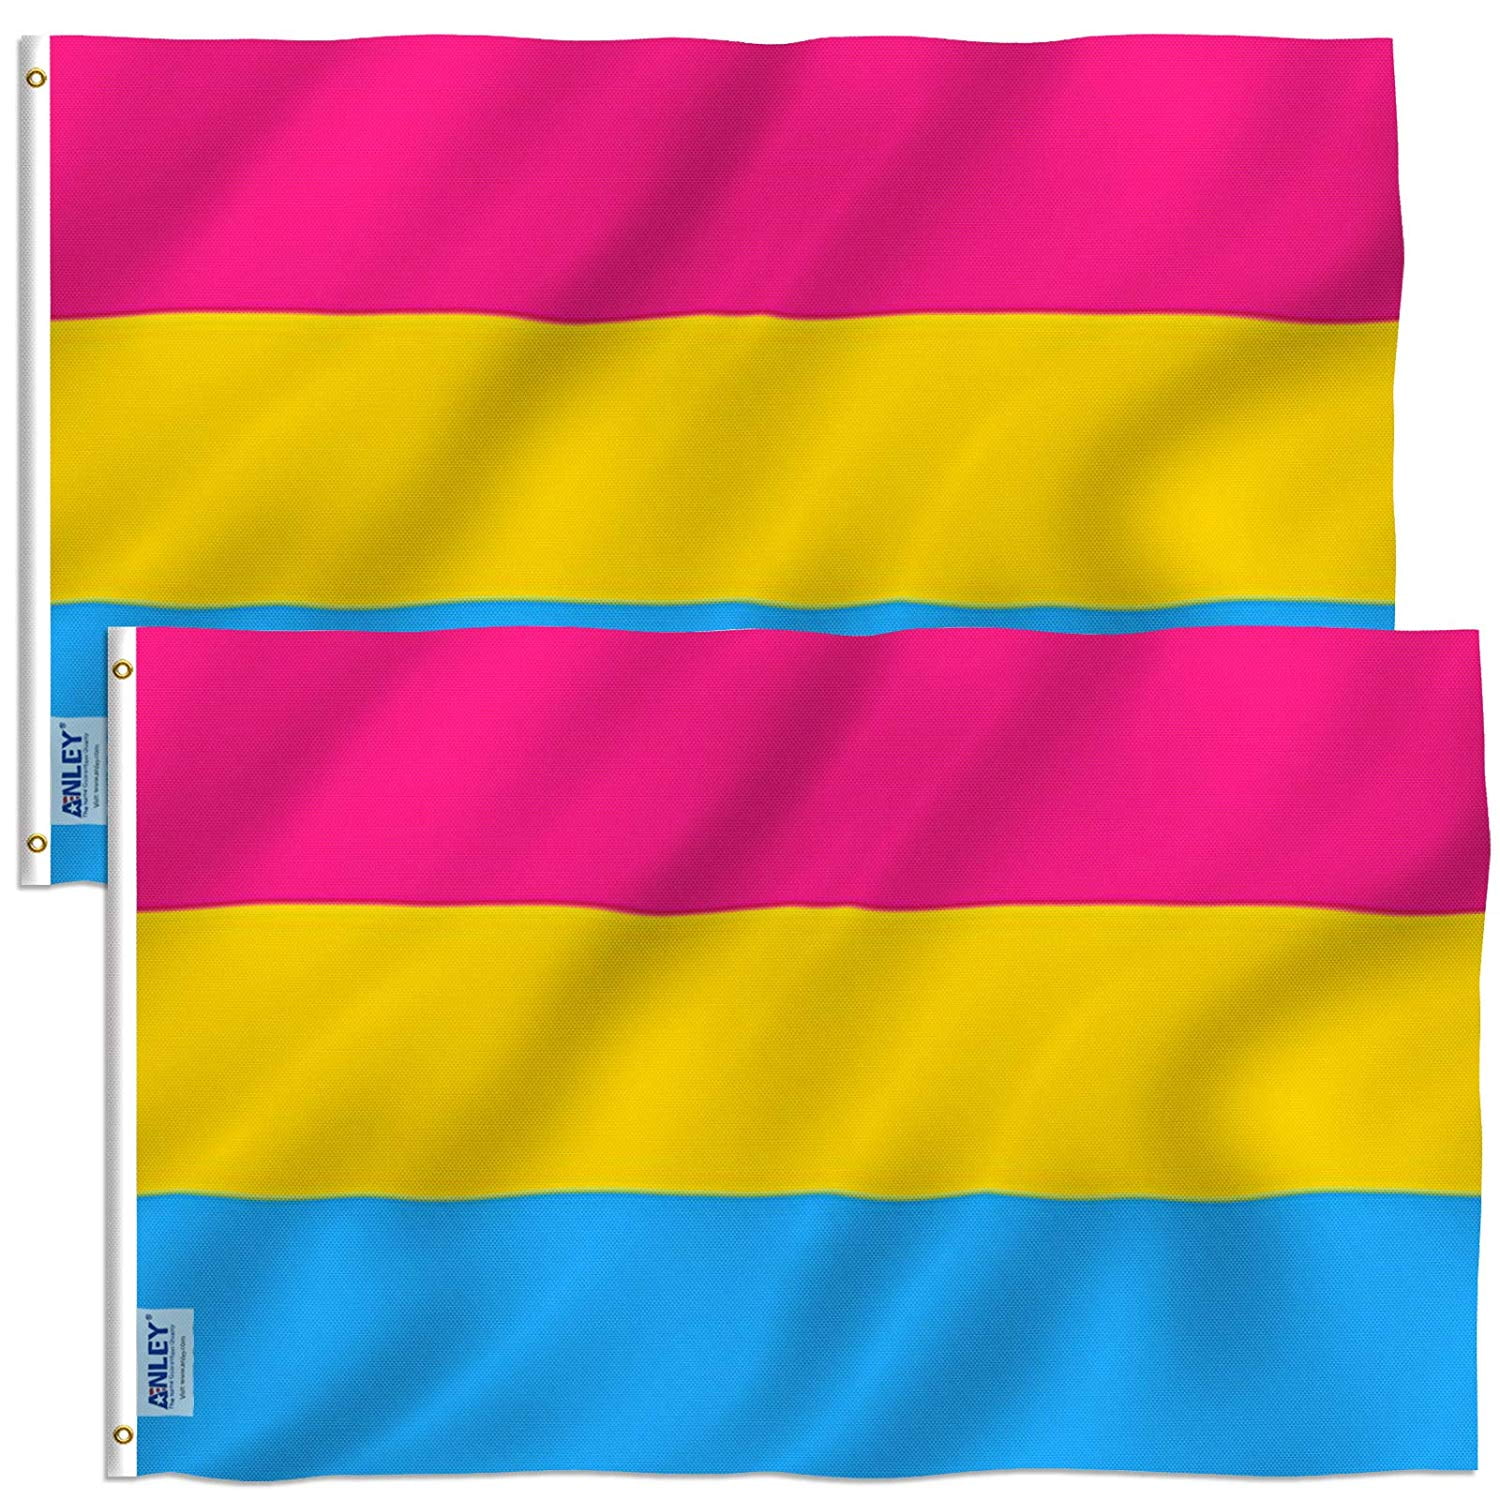 Anley 3x5 foot Pansexual Pride Flag - Omnisexual LGBT Flags Polyester 